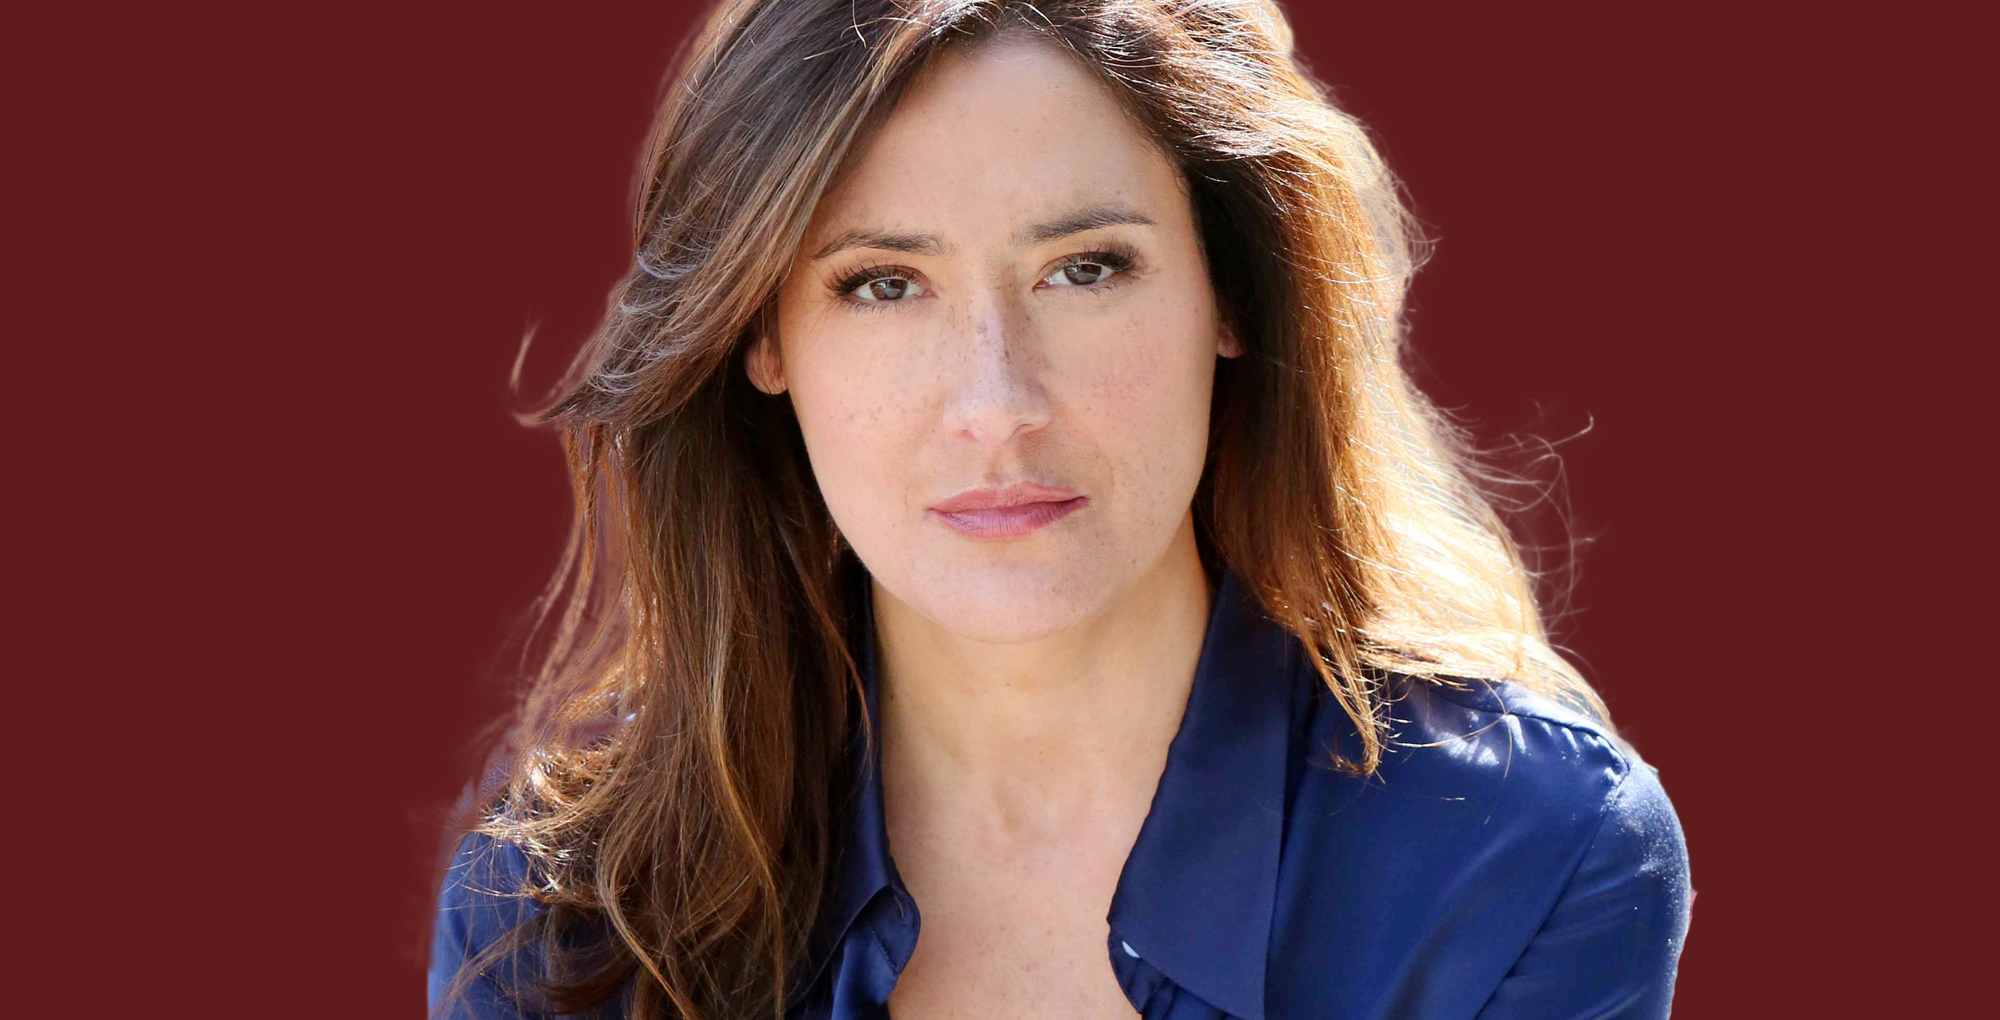 alicia coppola, an alum of young and the restless and another world, celebrates her birthday.